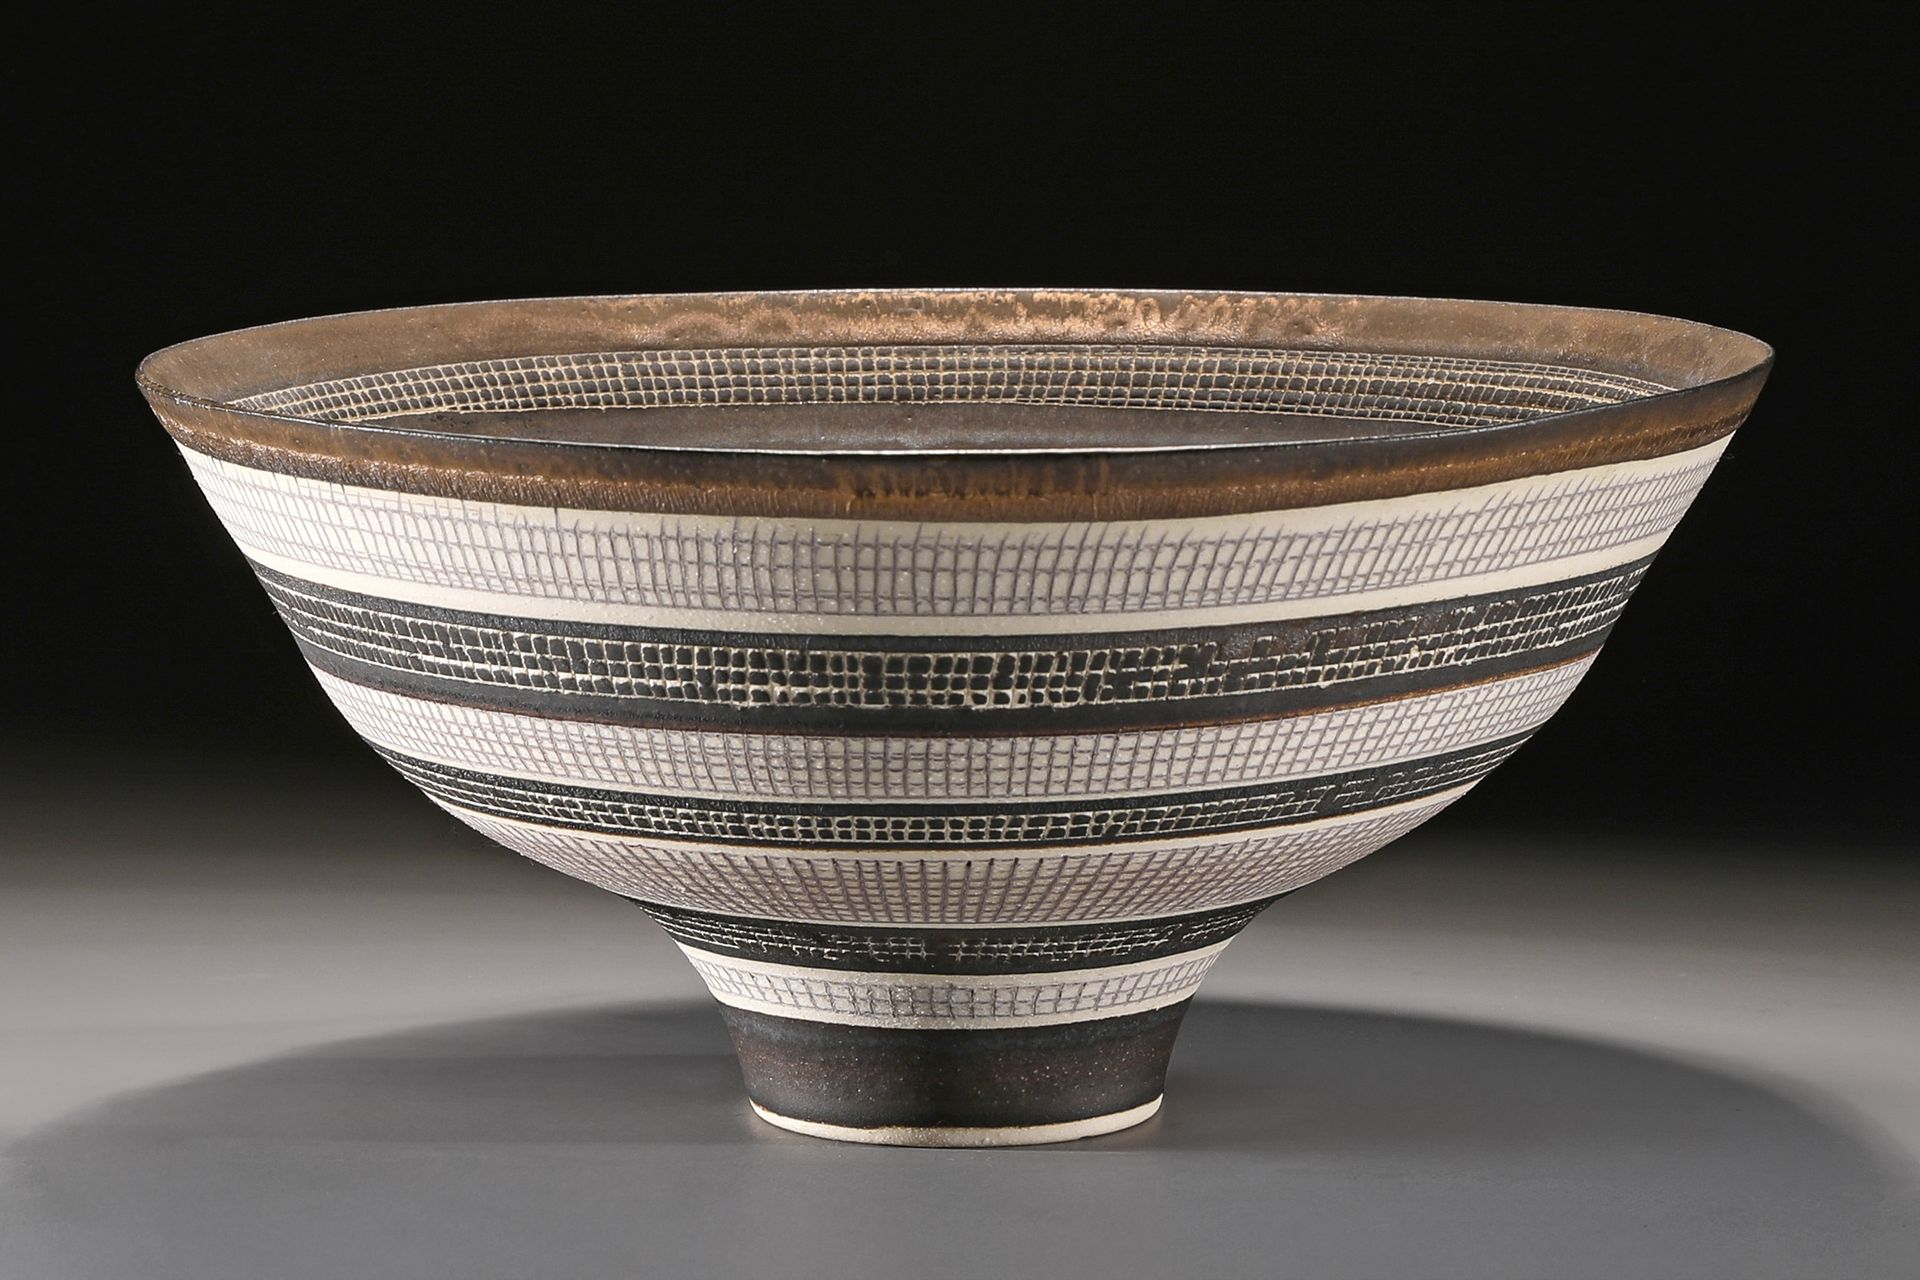 Lucie Rie*, Sgraffito Bowl, 1968-1972 Lucie Rie*, Coupe sgraffite, 1968-1972
196&hellip;